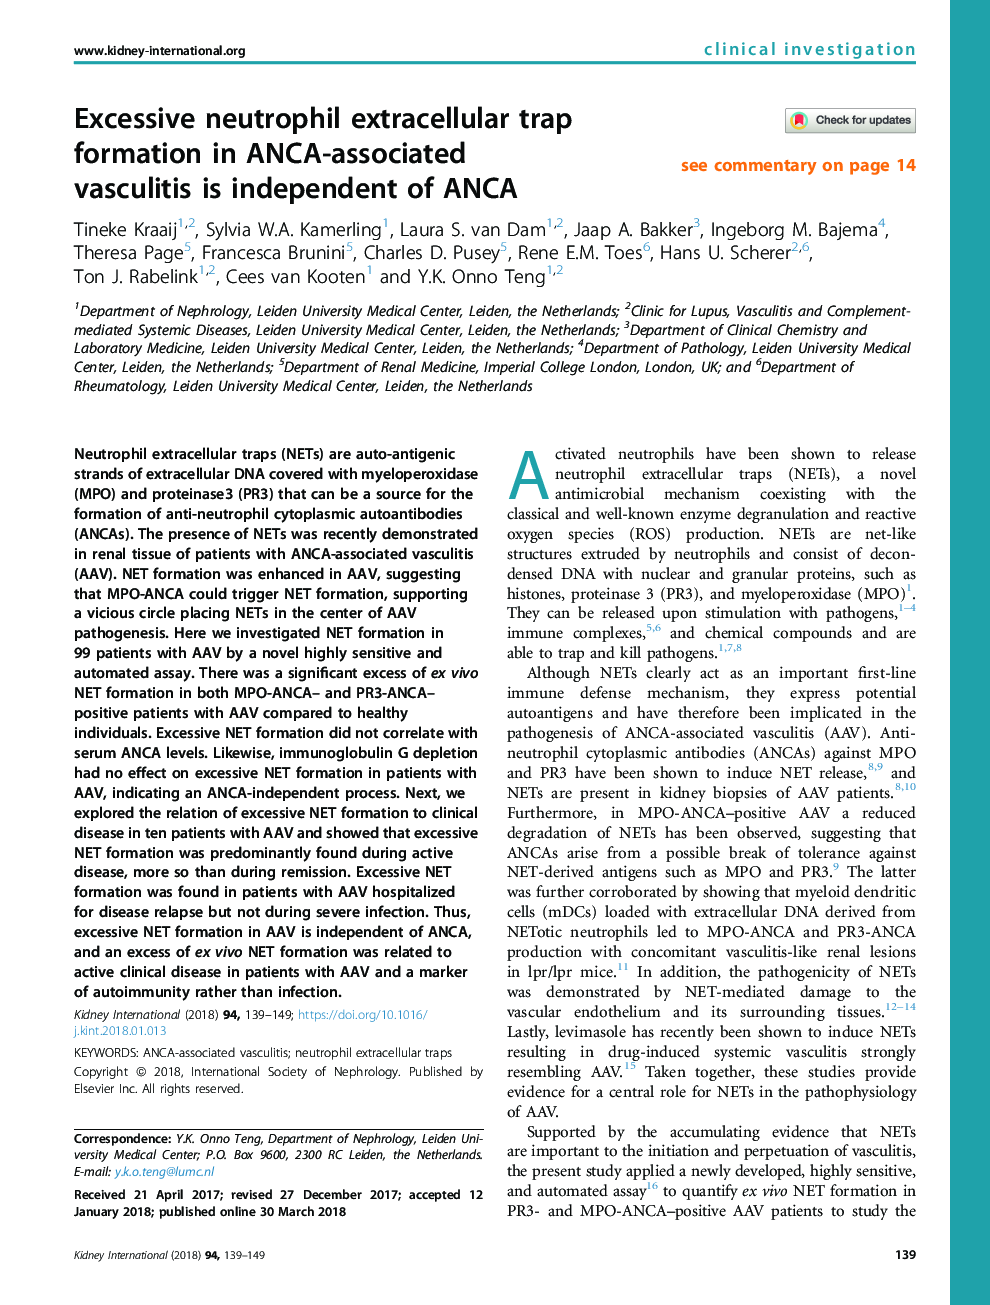 Excessive neutrophil extracellular trap formation in ANCA-associated vasculitis is independent of ANCA